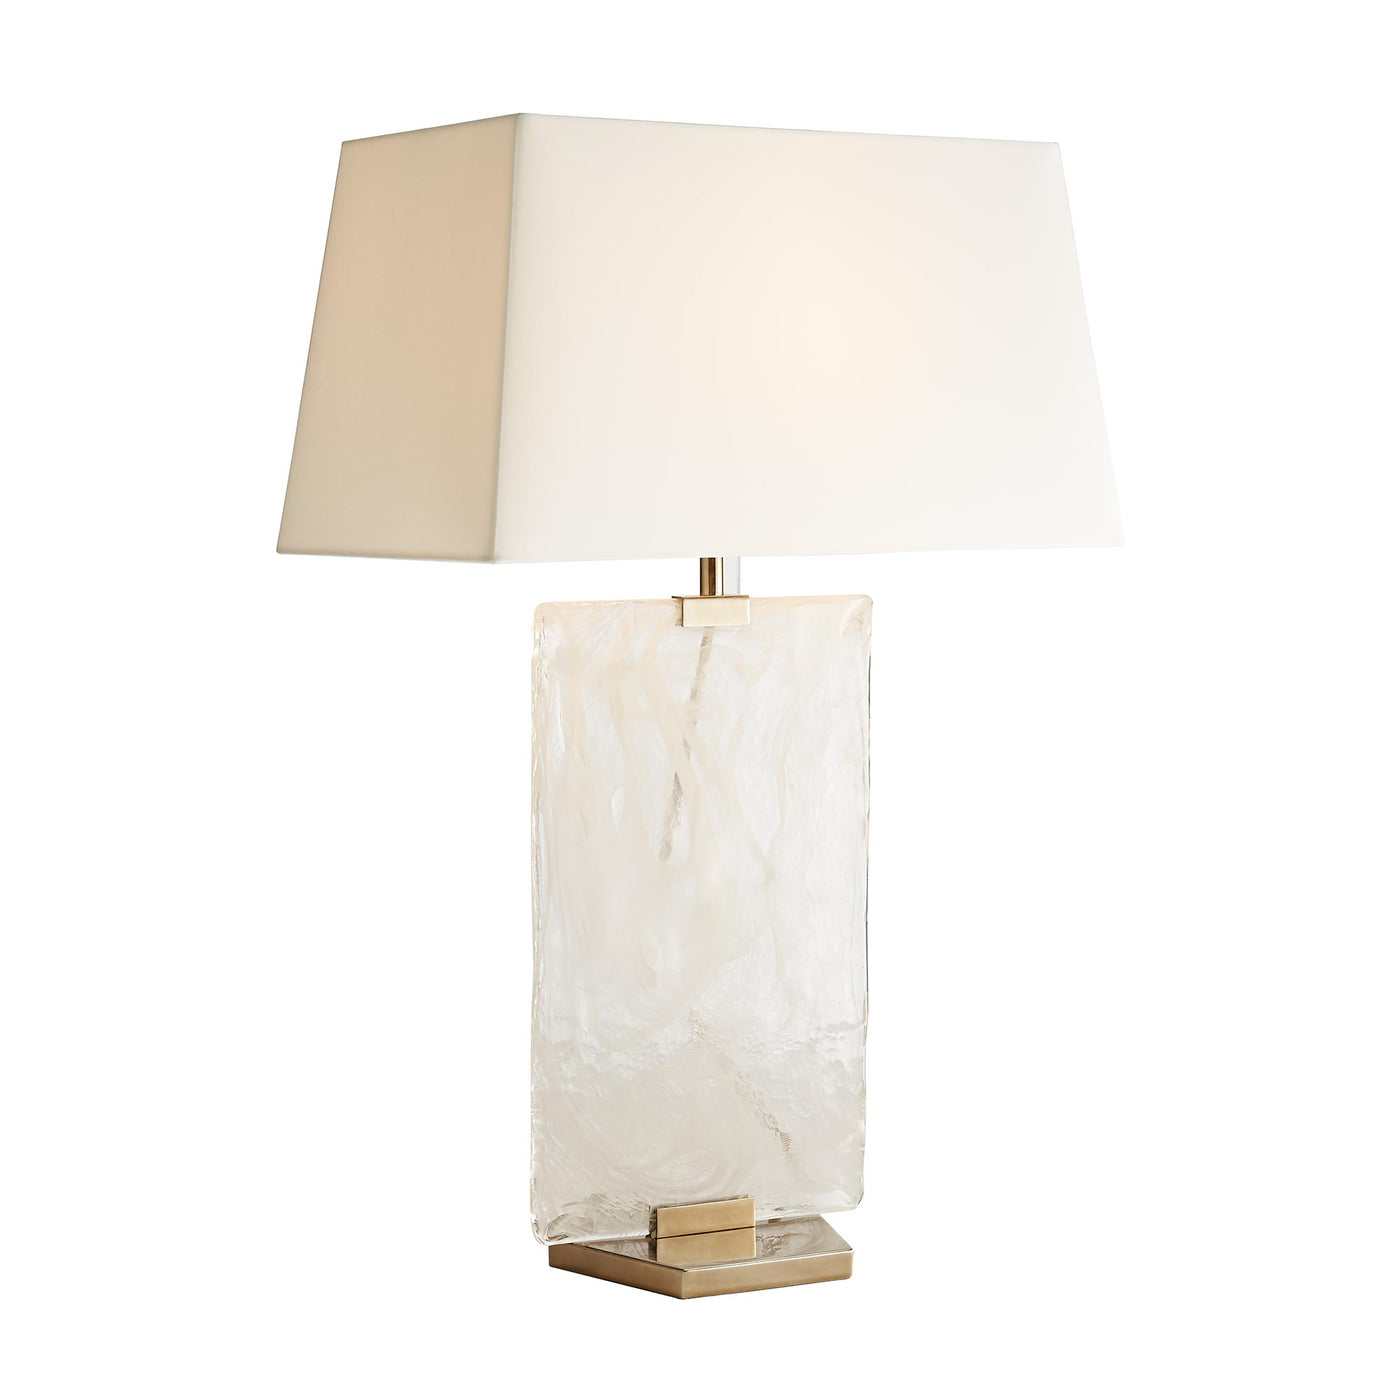 TABLE LAMP OPAL SWIRLS WITH HERITAGE STAINLESS